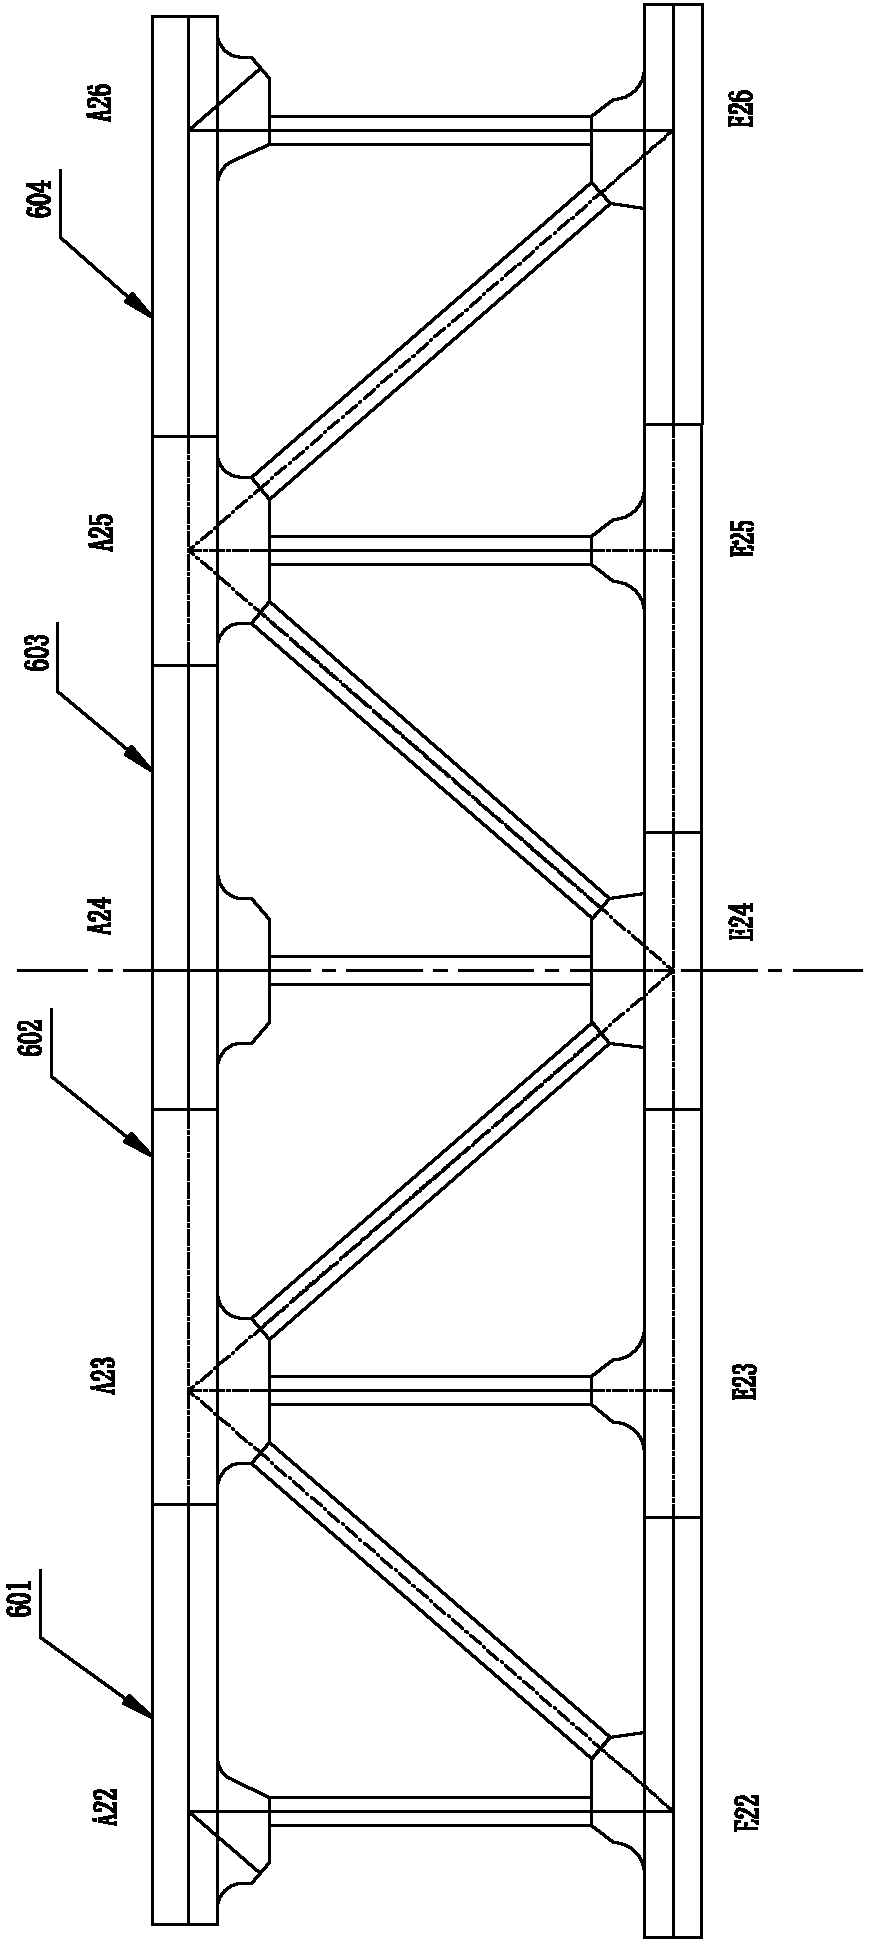 Method for erecting girder on top of main tower mound of steel truss girder cable-stayed bridge